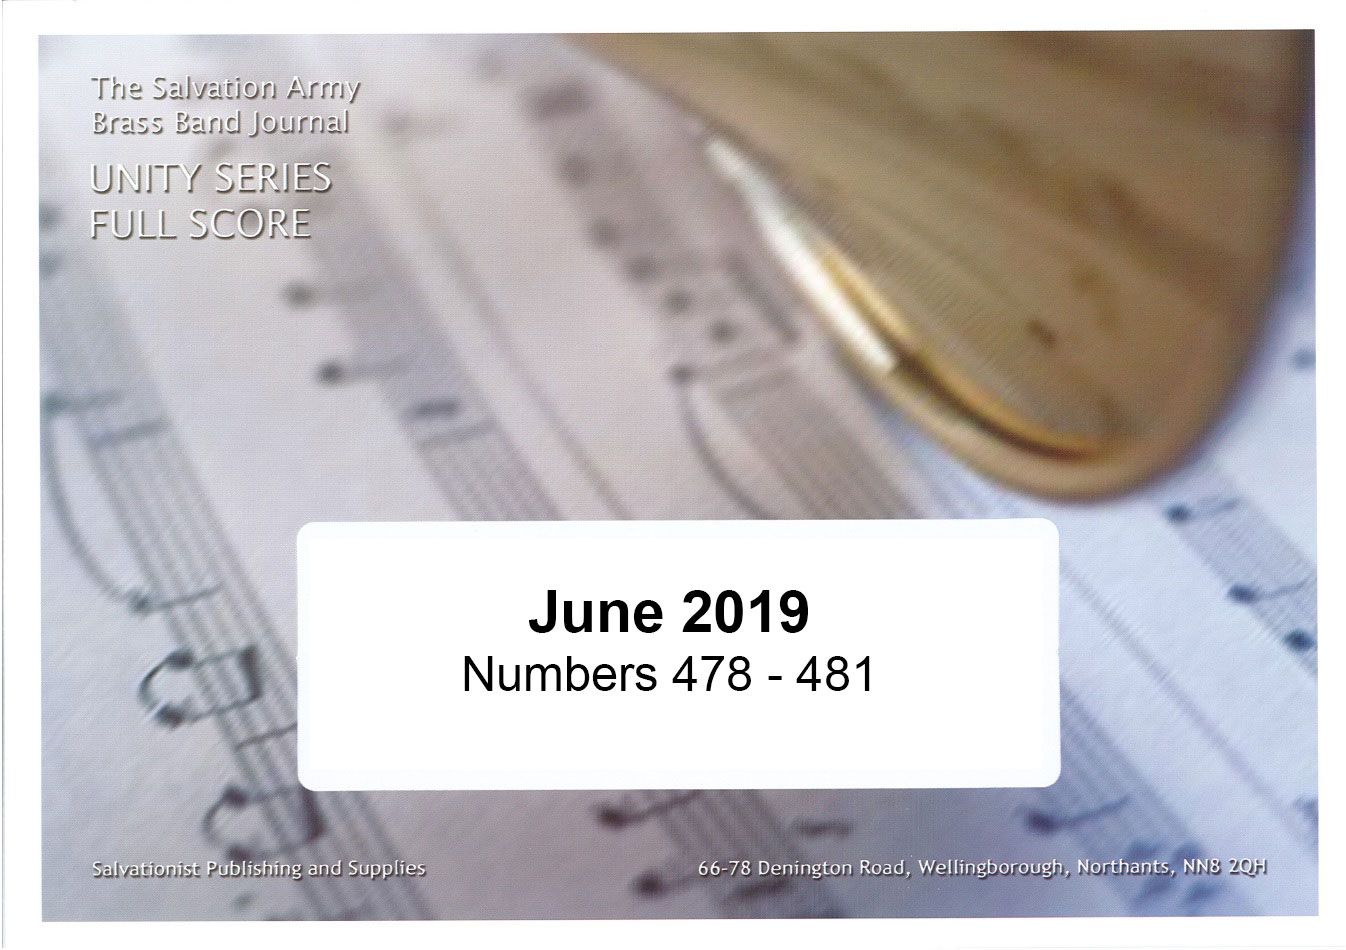 Unity Series Band Journal June 2019 - Numbers 478 - 481